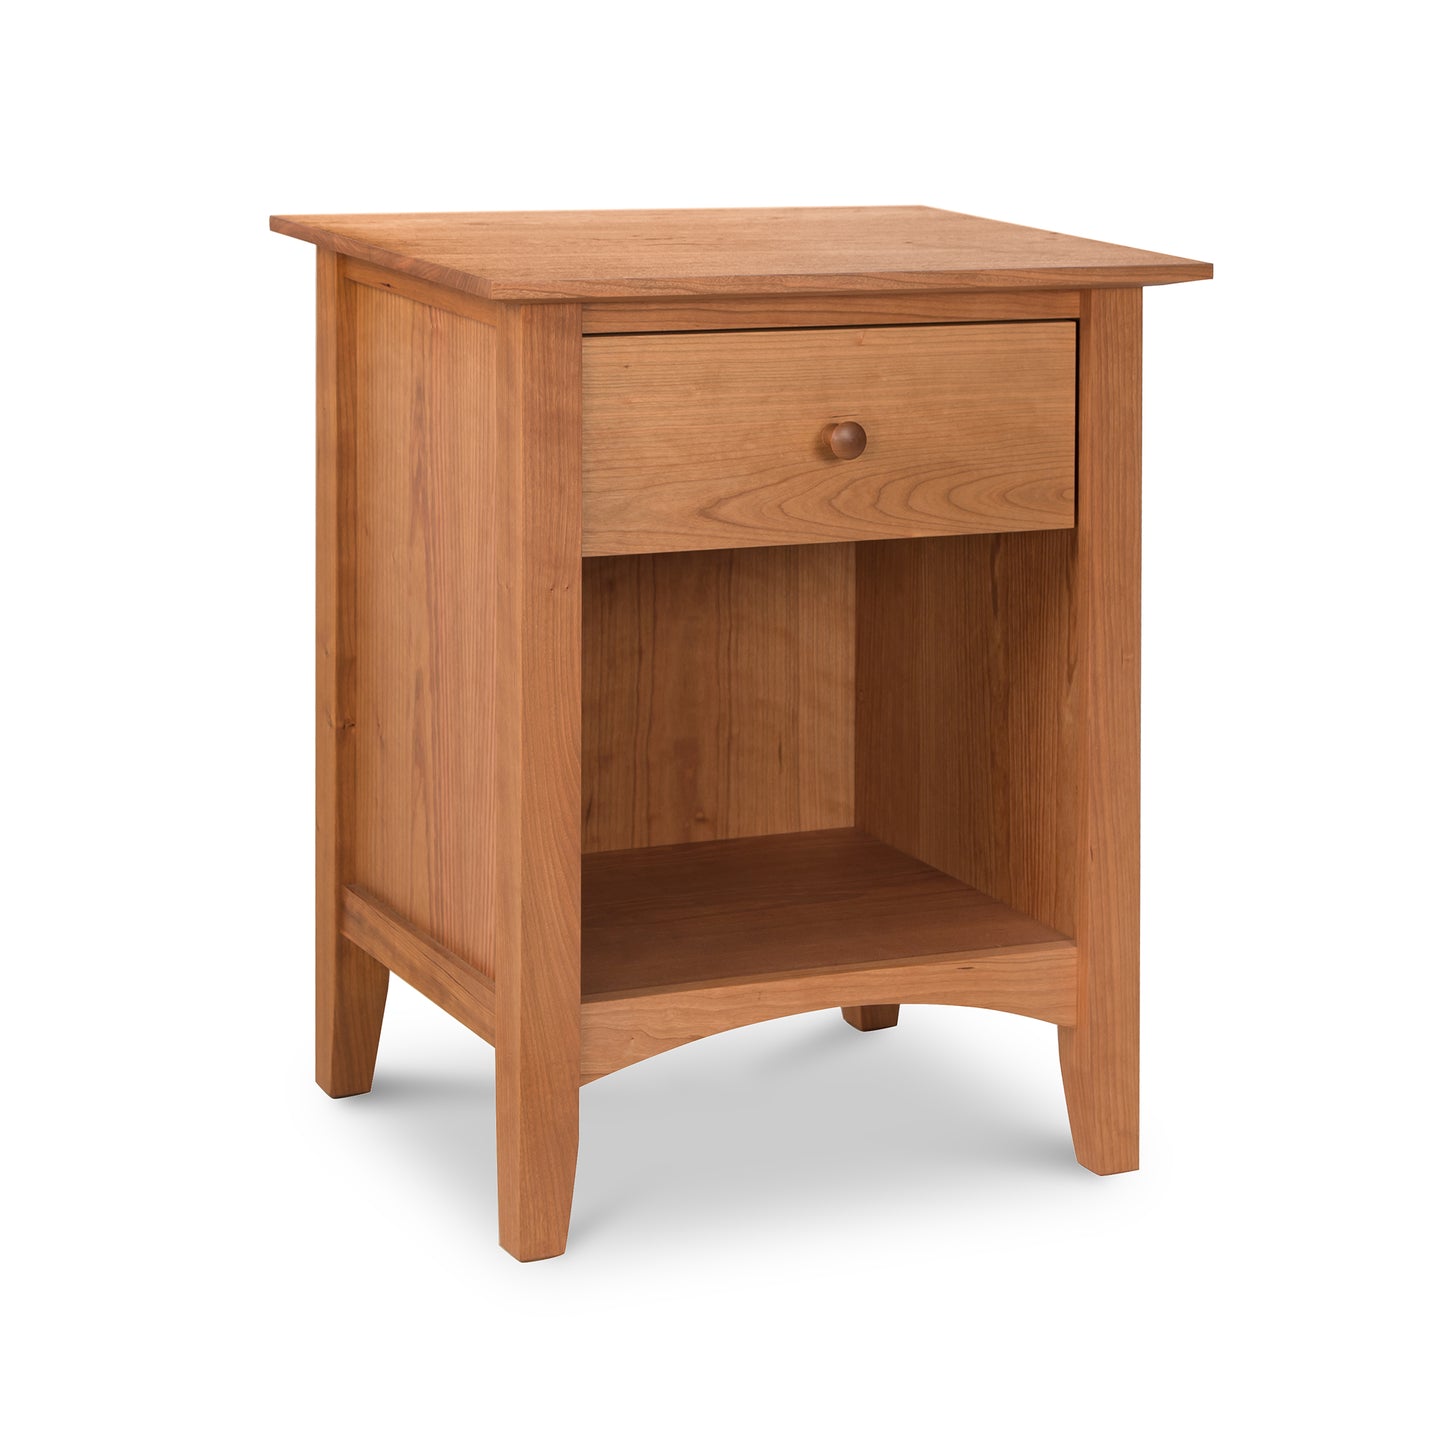 A Maple Corner Woodworks American Shaker 1-Drawer Enclosed Shelf Nightstand, photographed against a white background.